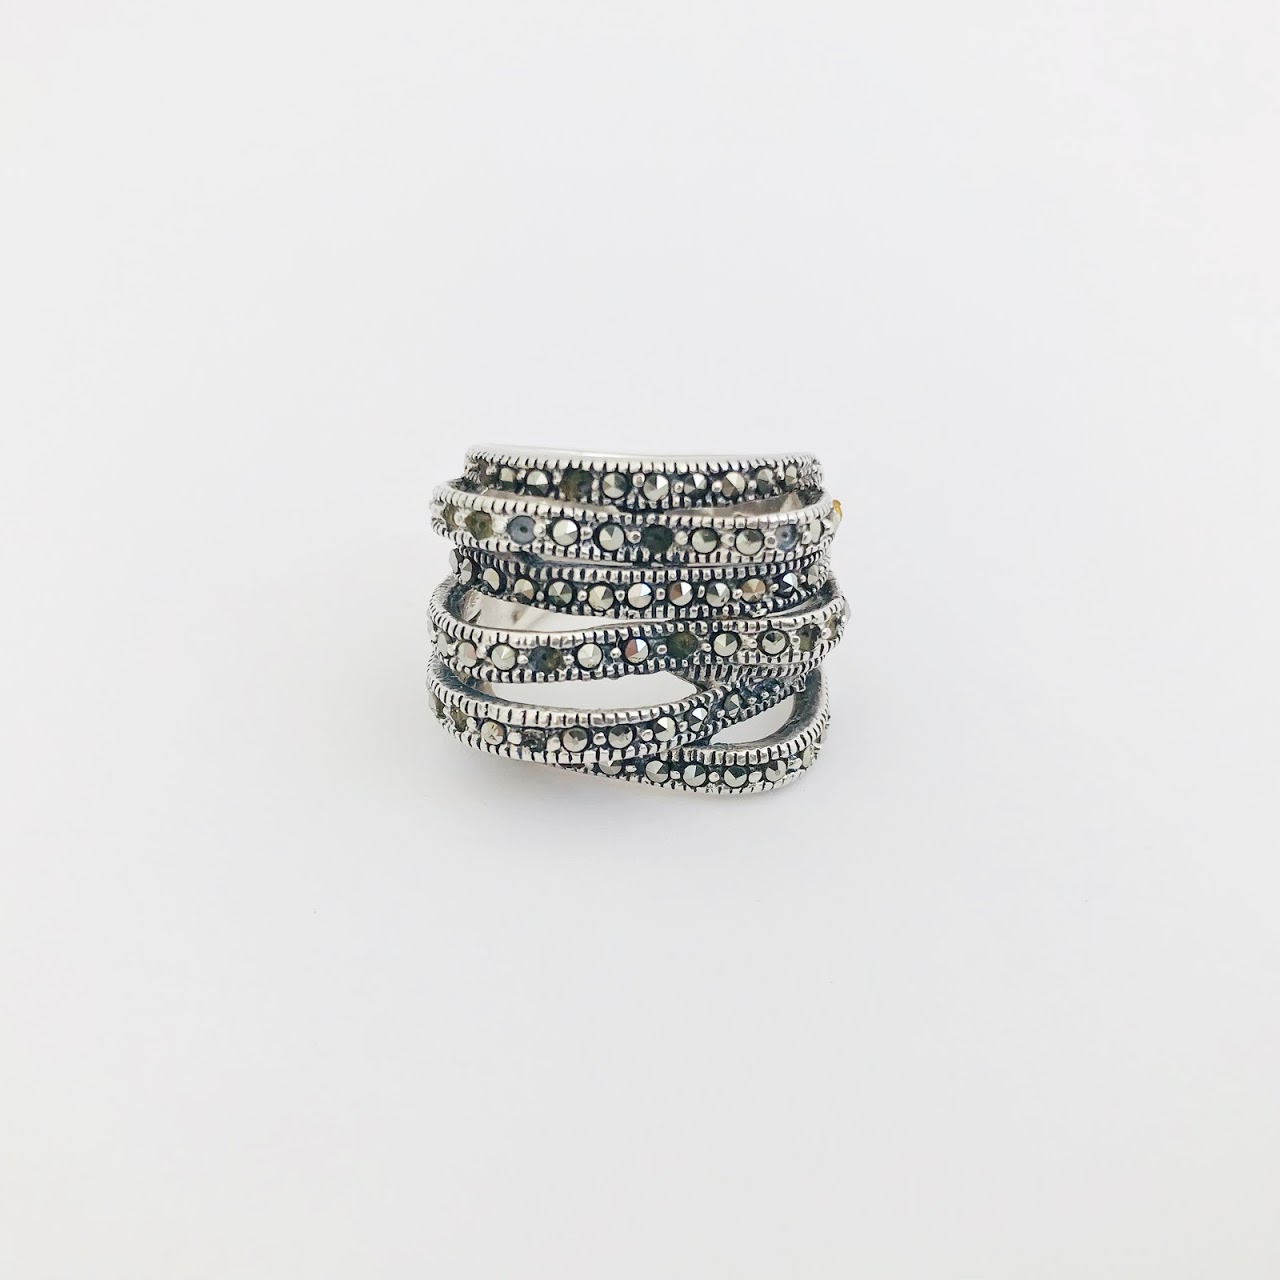 Sterling Silver and Marcasite Cocktail Ring